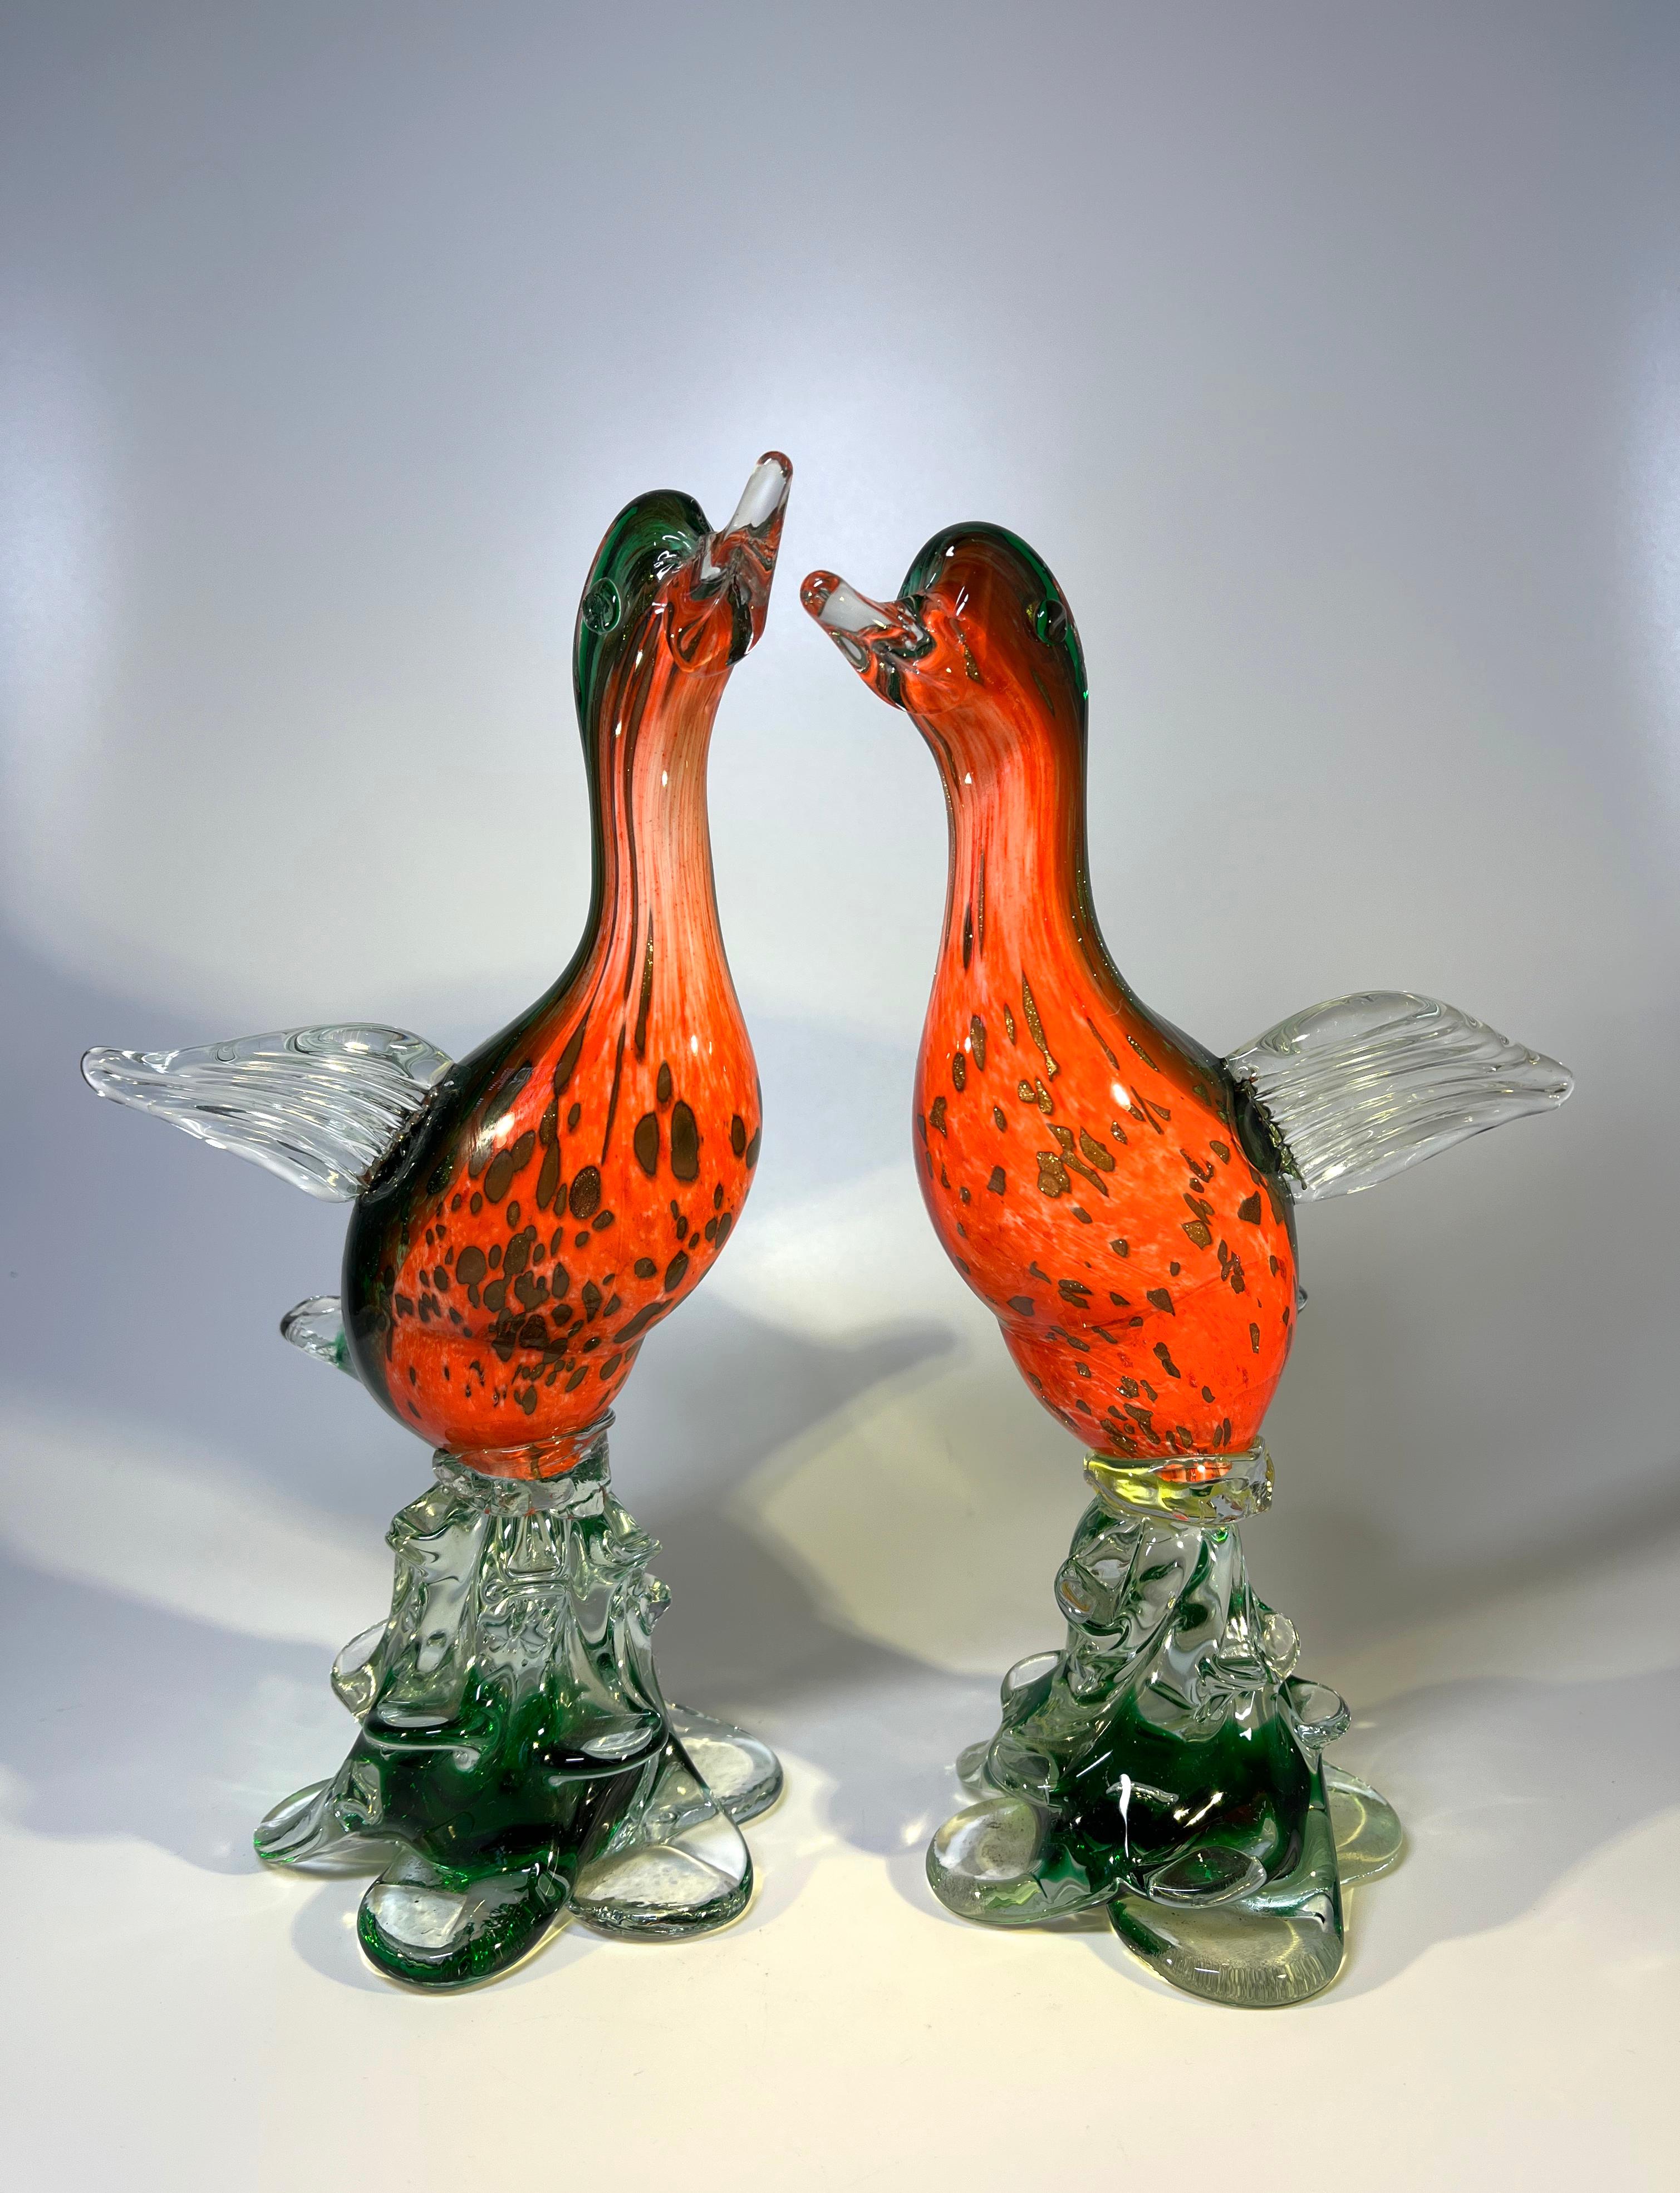 An expressive pair of vibrant Murano glass birds
Superbly hand blown using crimson red, sparkling avventurina, rich emerald green and crystal clear glass
Circa 1960's
A substantial and weighty pair
Height 10.5 inch, Beak to Tail 7 inch, Width 4